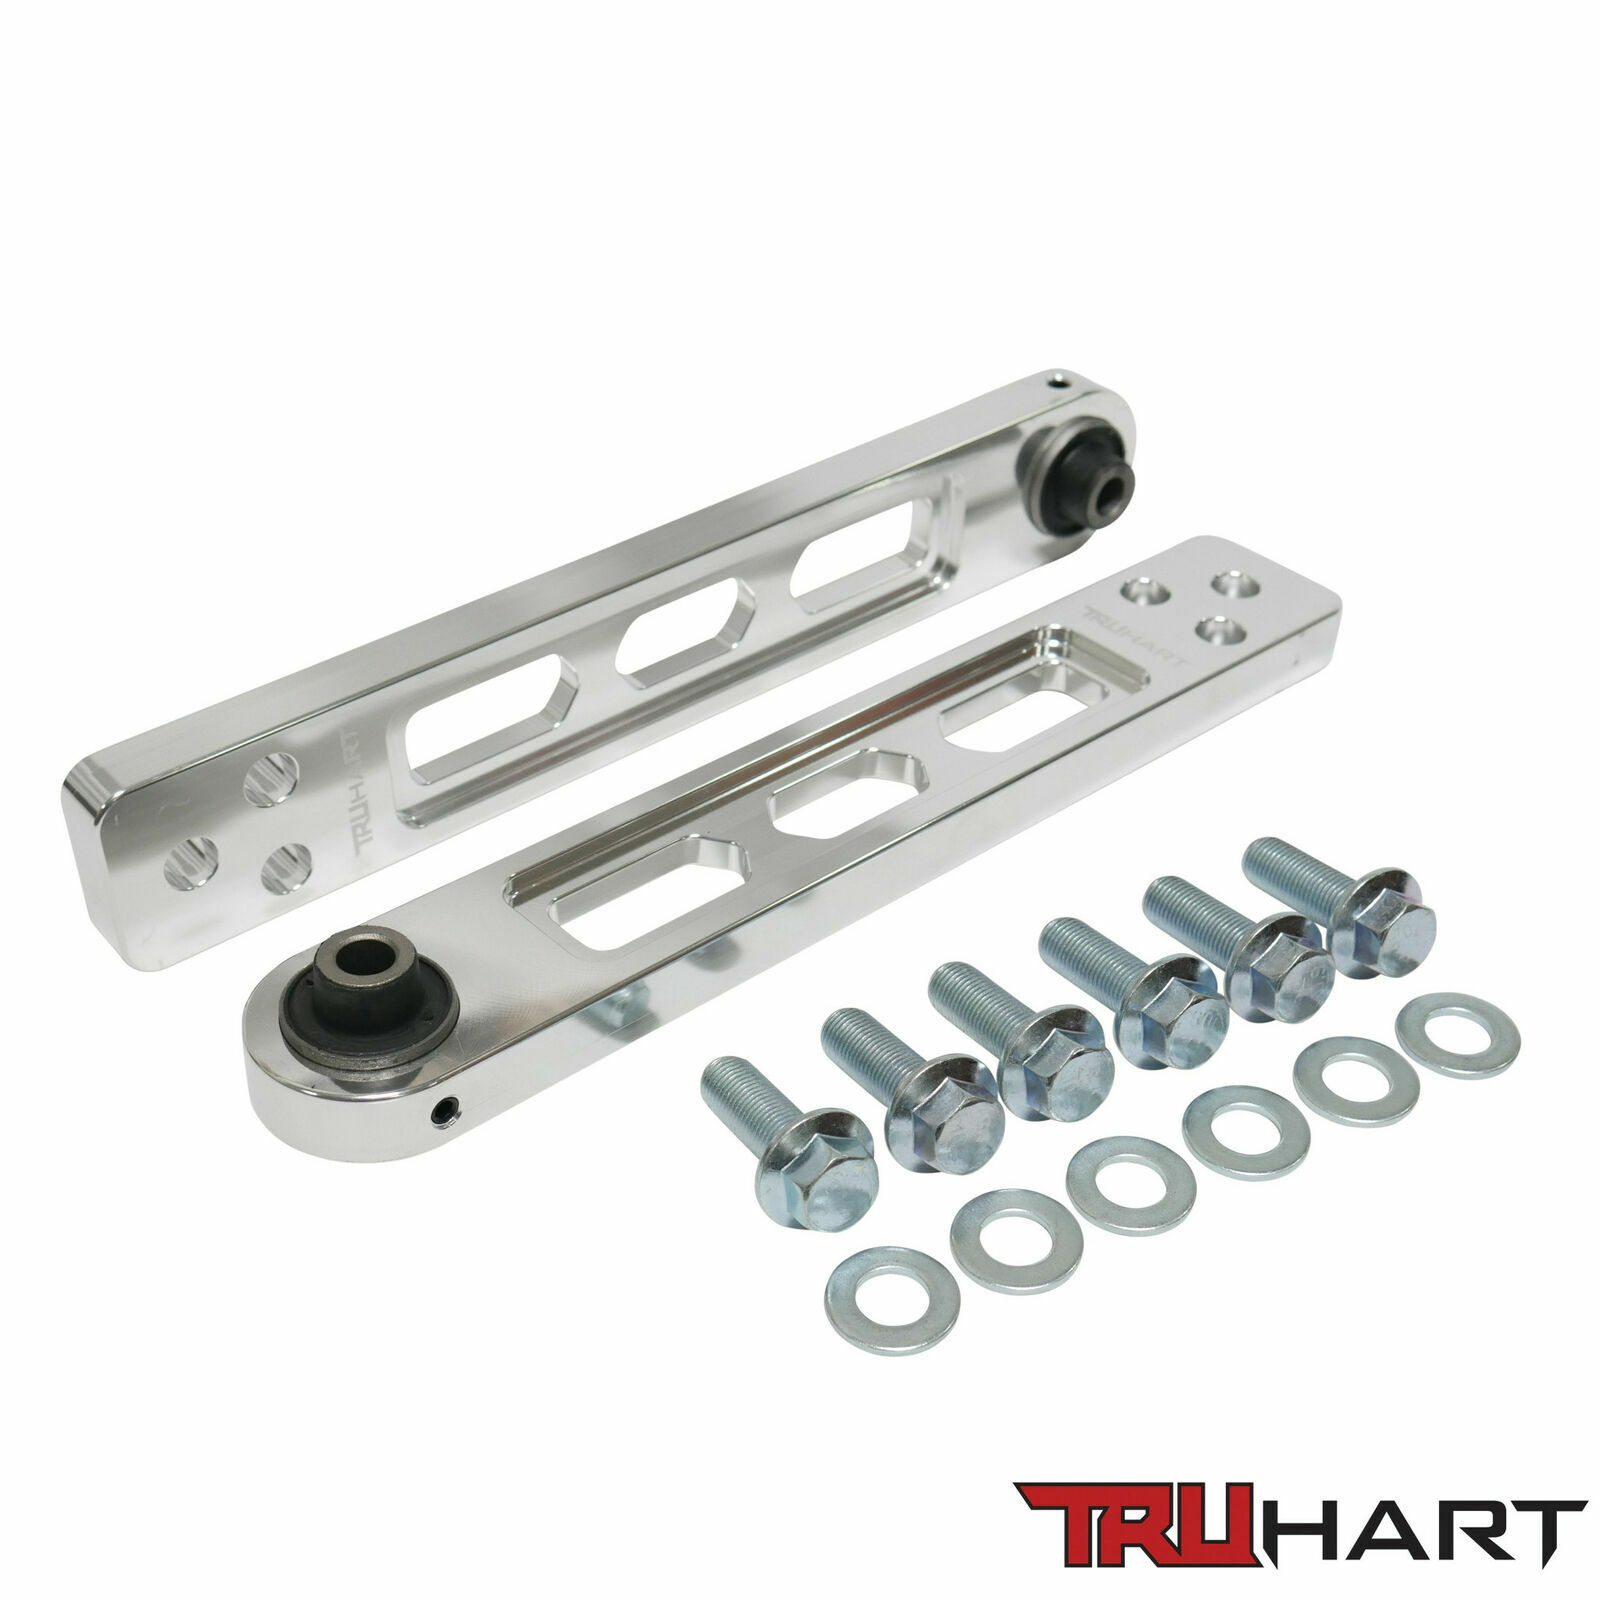 TruHart For 02-06 RSX & 02-06 Element Rear Lower Control Arms Polish Kit LCA